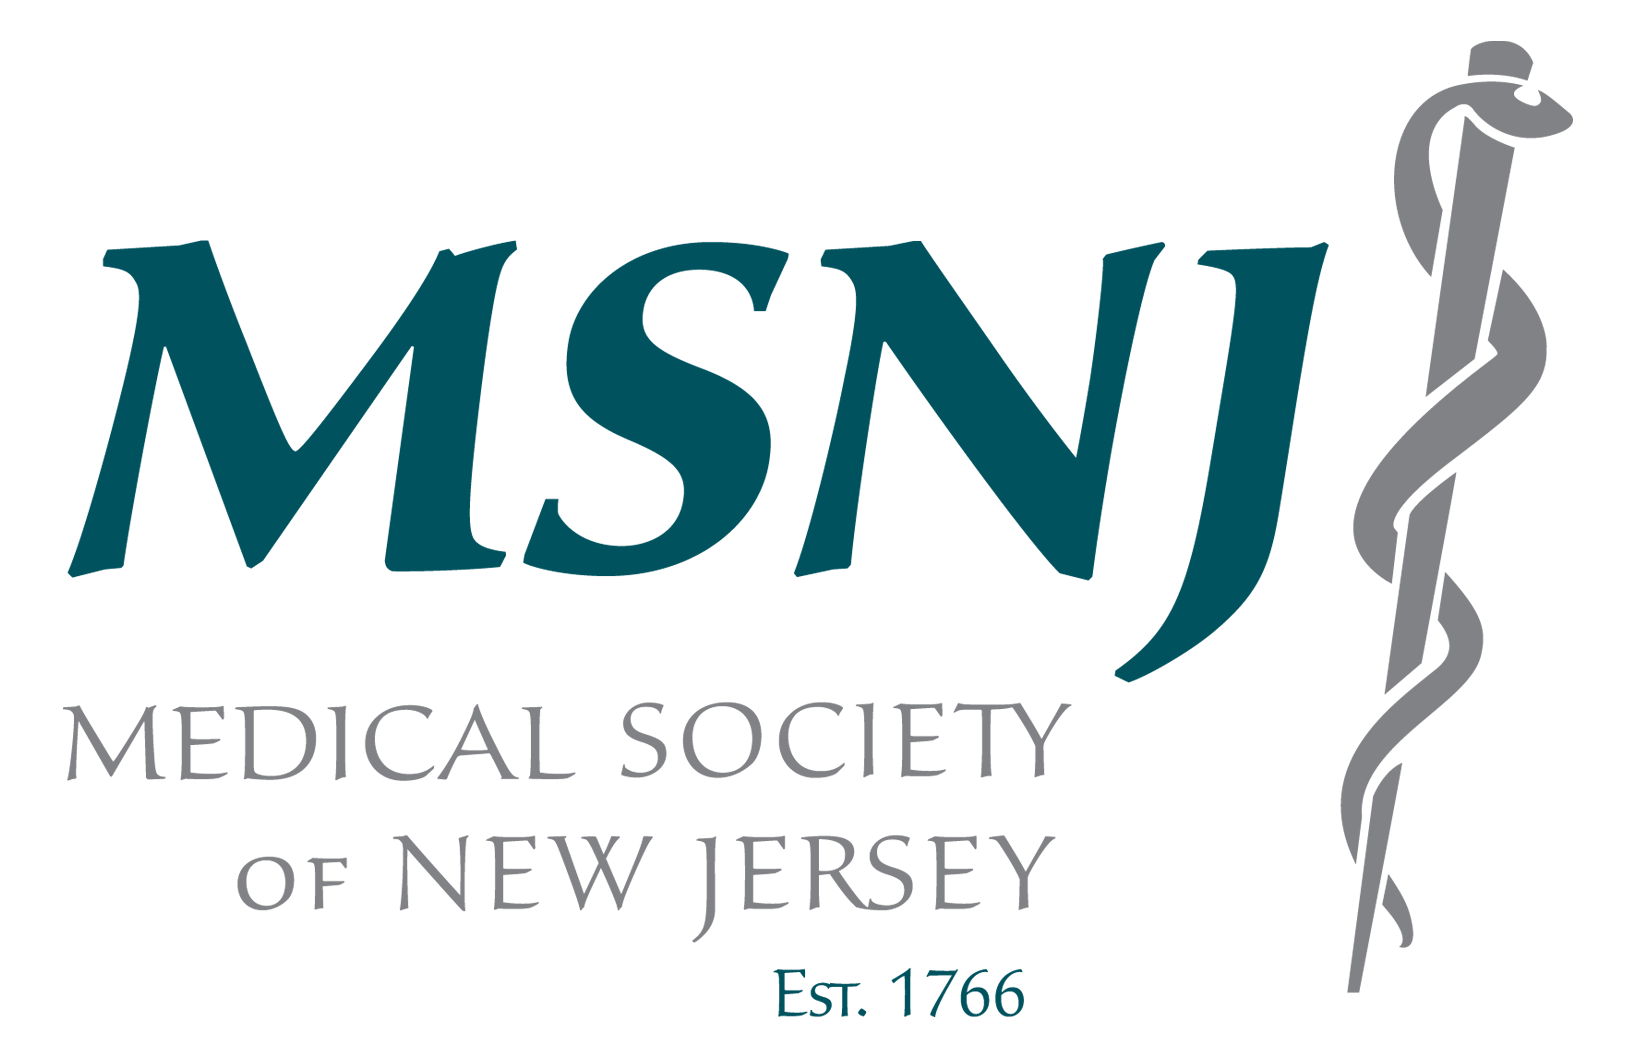 Medical Society of New Jersey